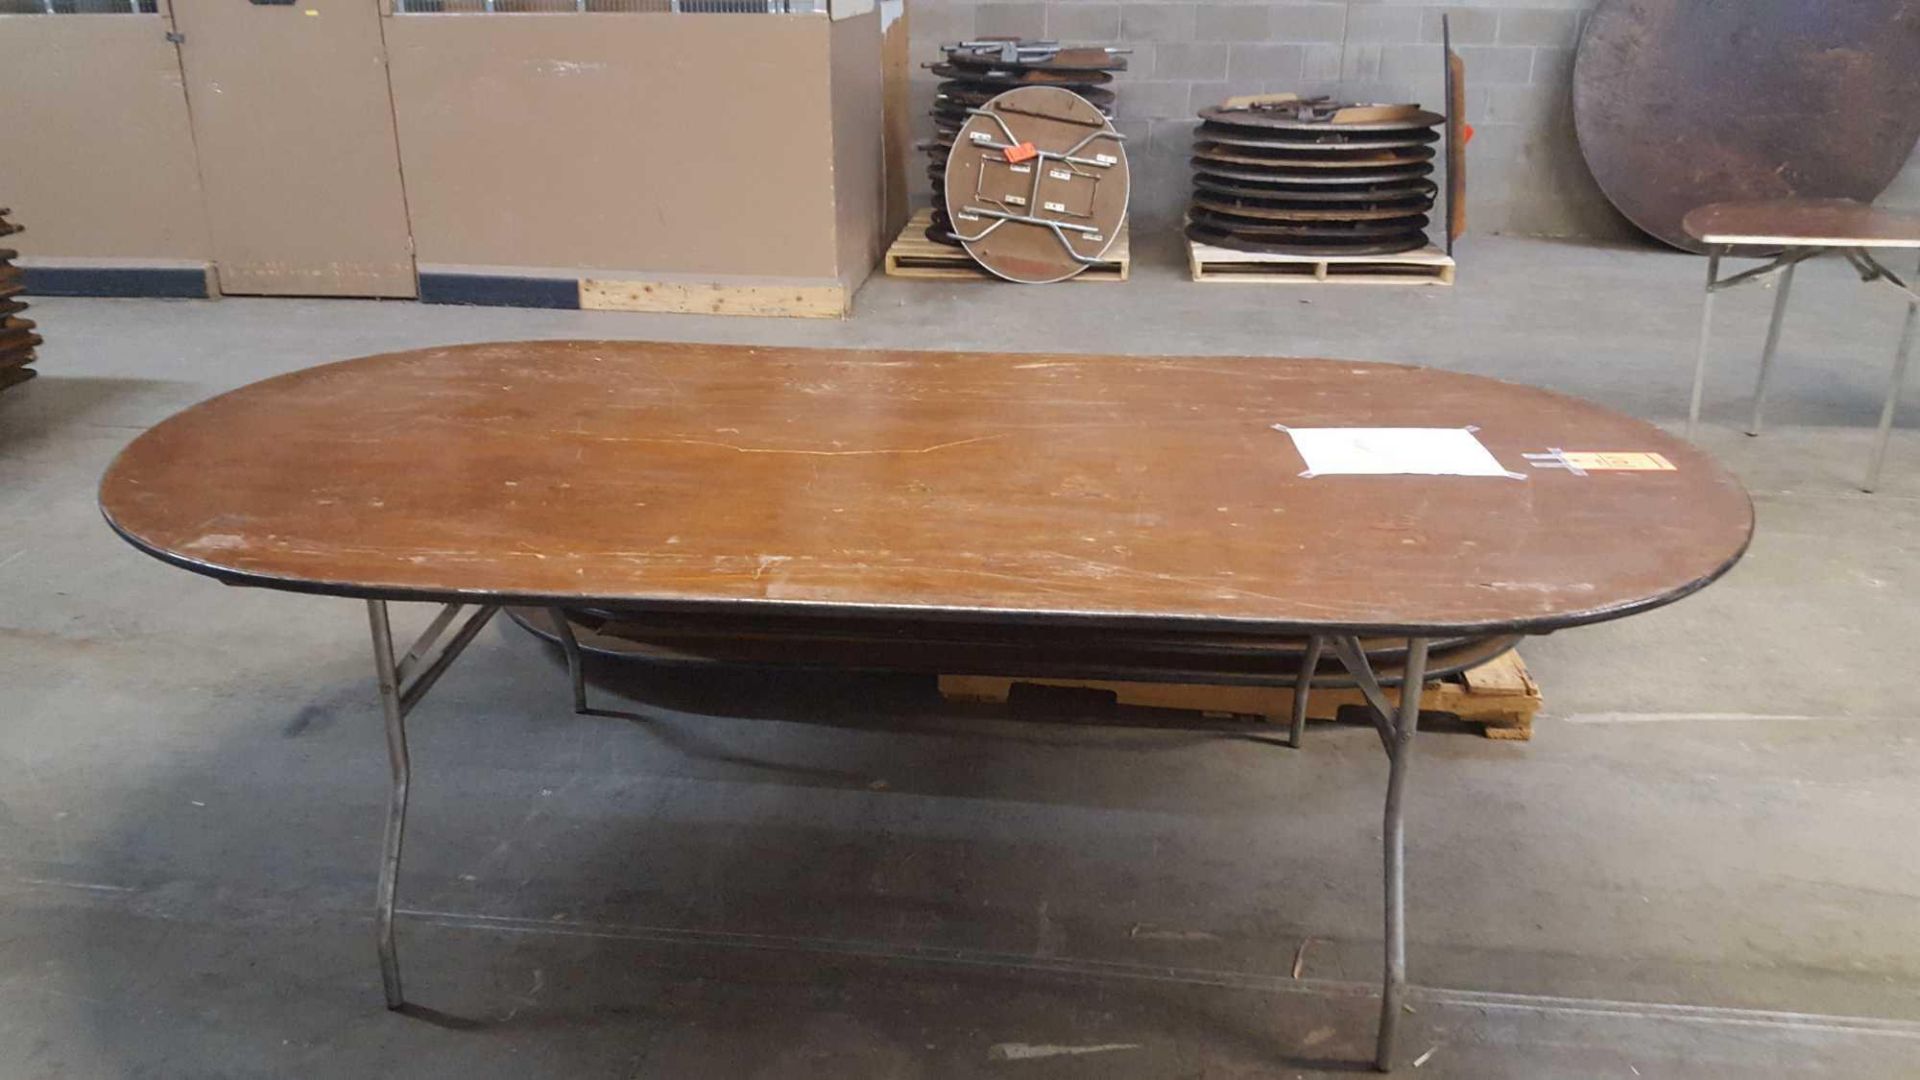 Lot of (6) Palmer racetrack tables, oval 84 inch by 48 inch by 30 in, with folding legs. - Image 2 of 4